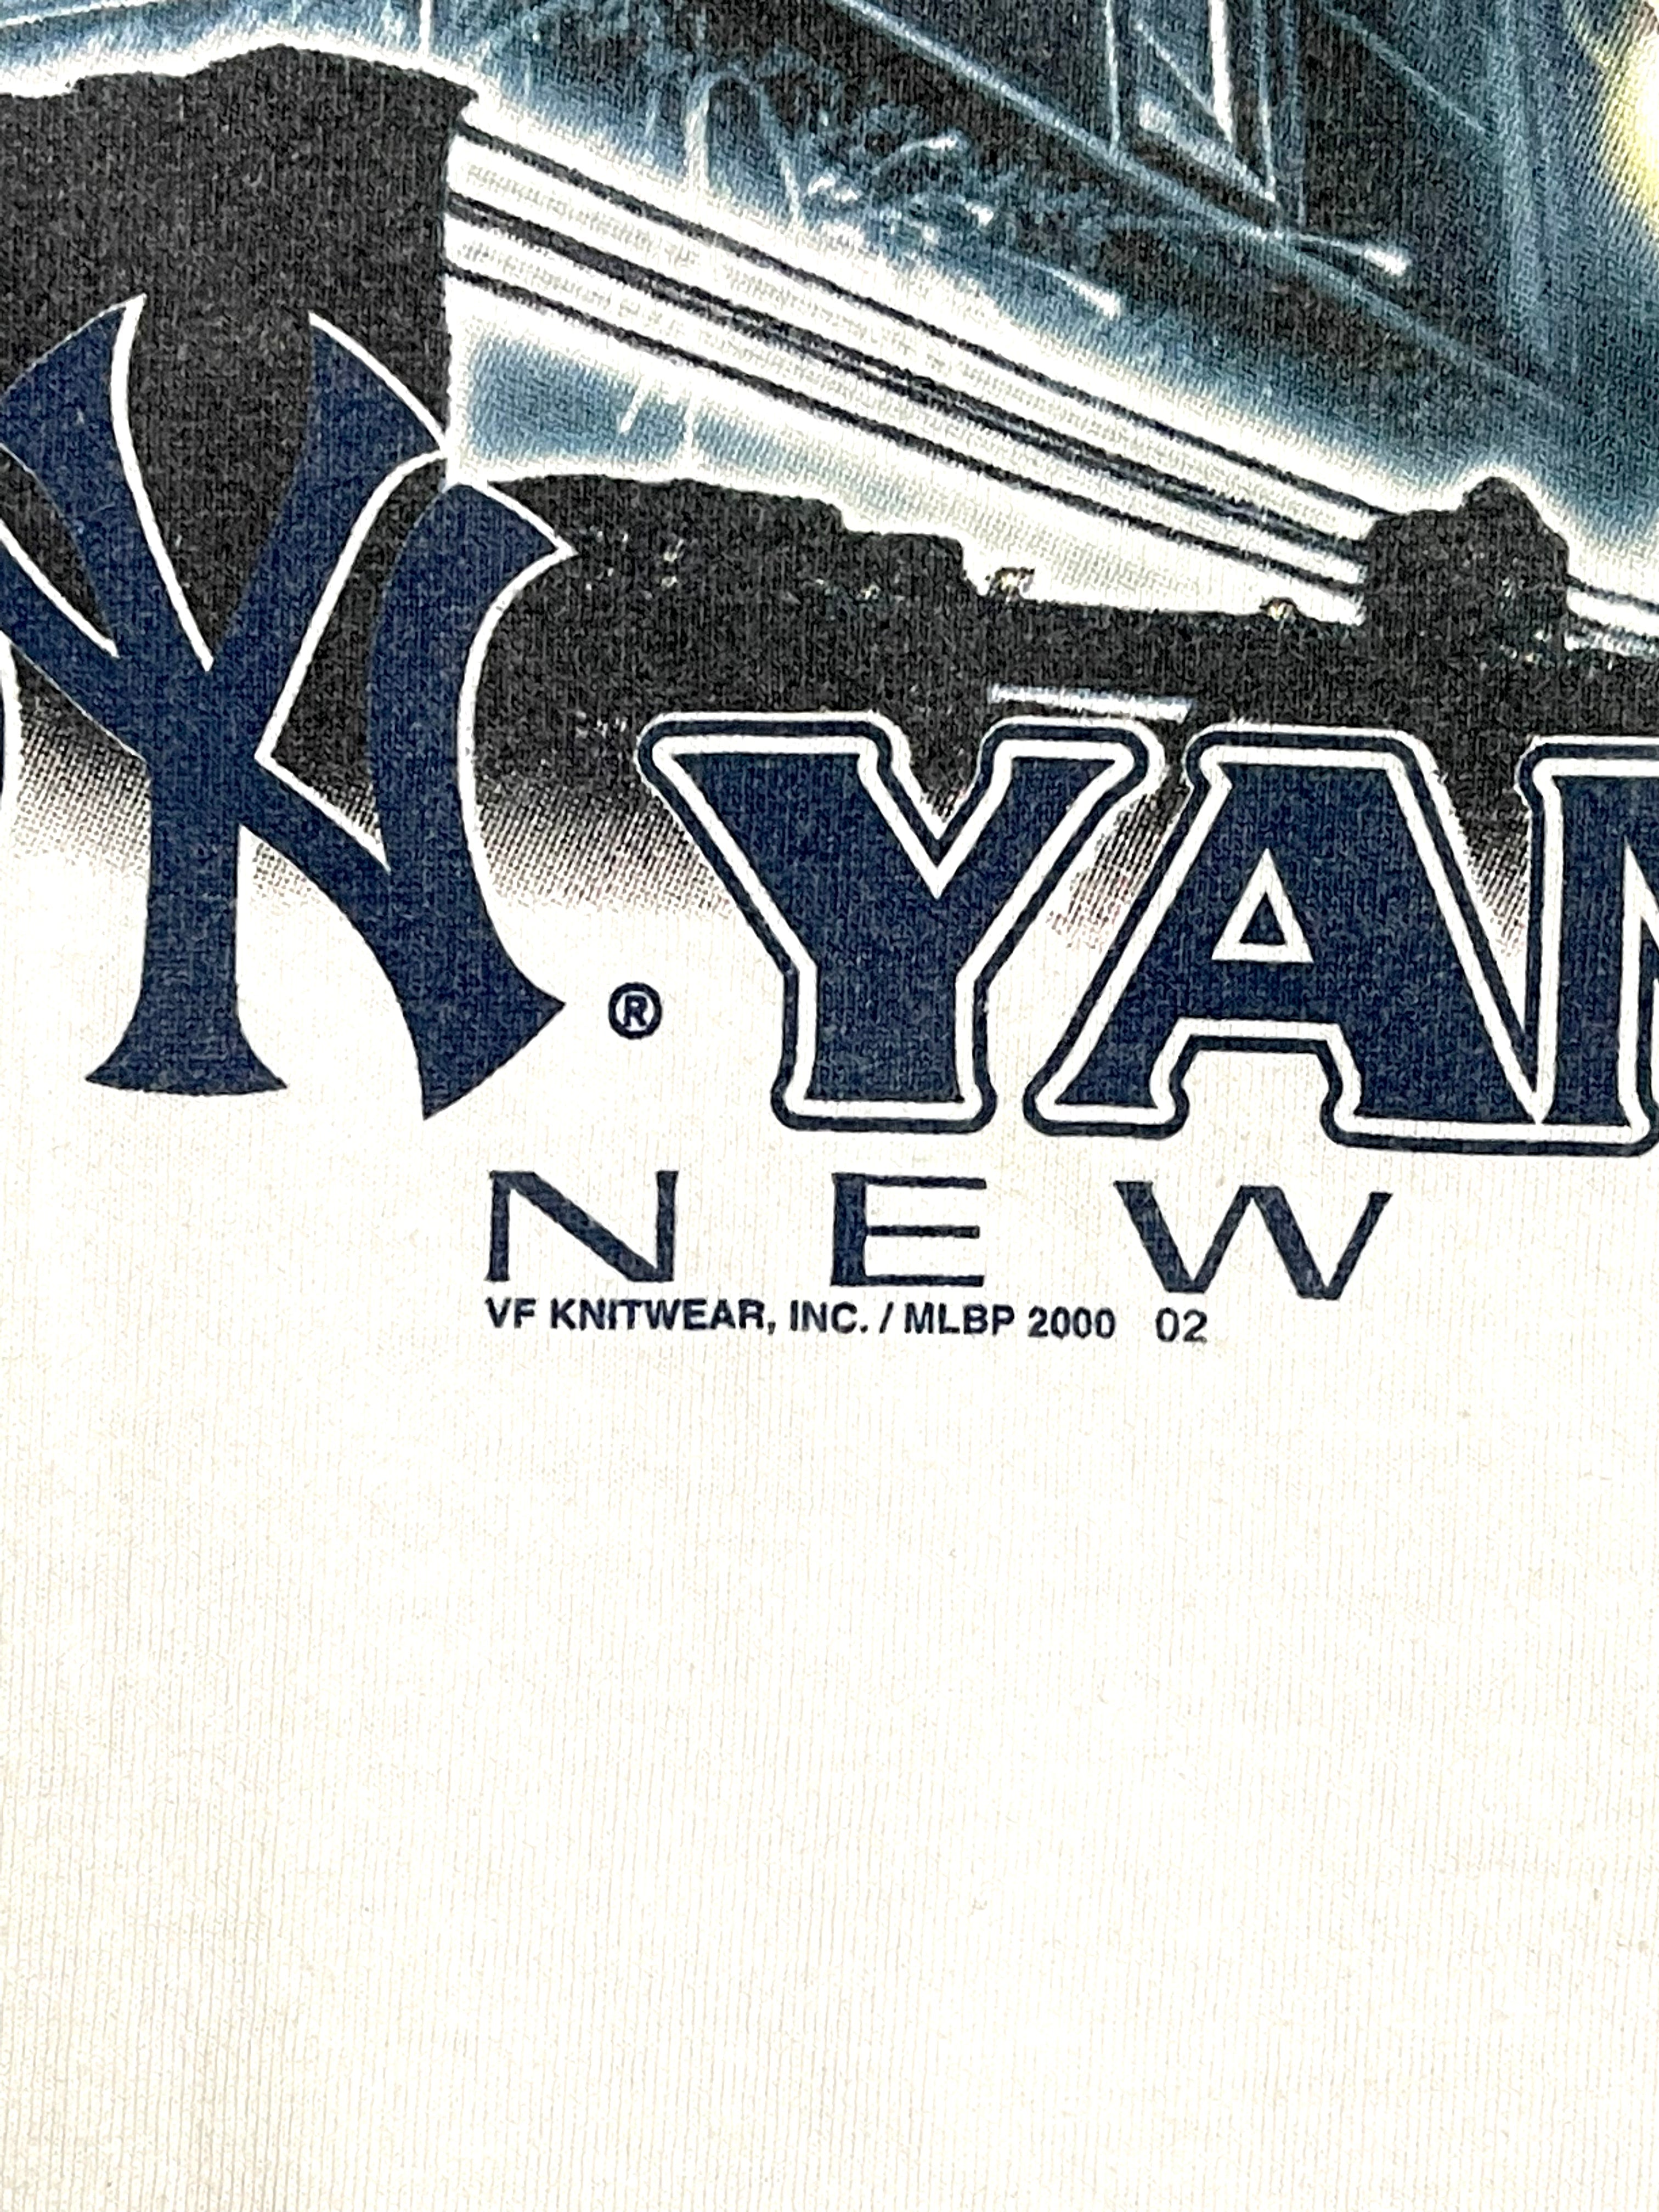 1990s Yankees World Champions T-Shirt – Red Vintage Co